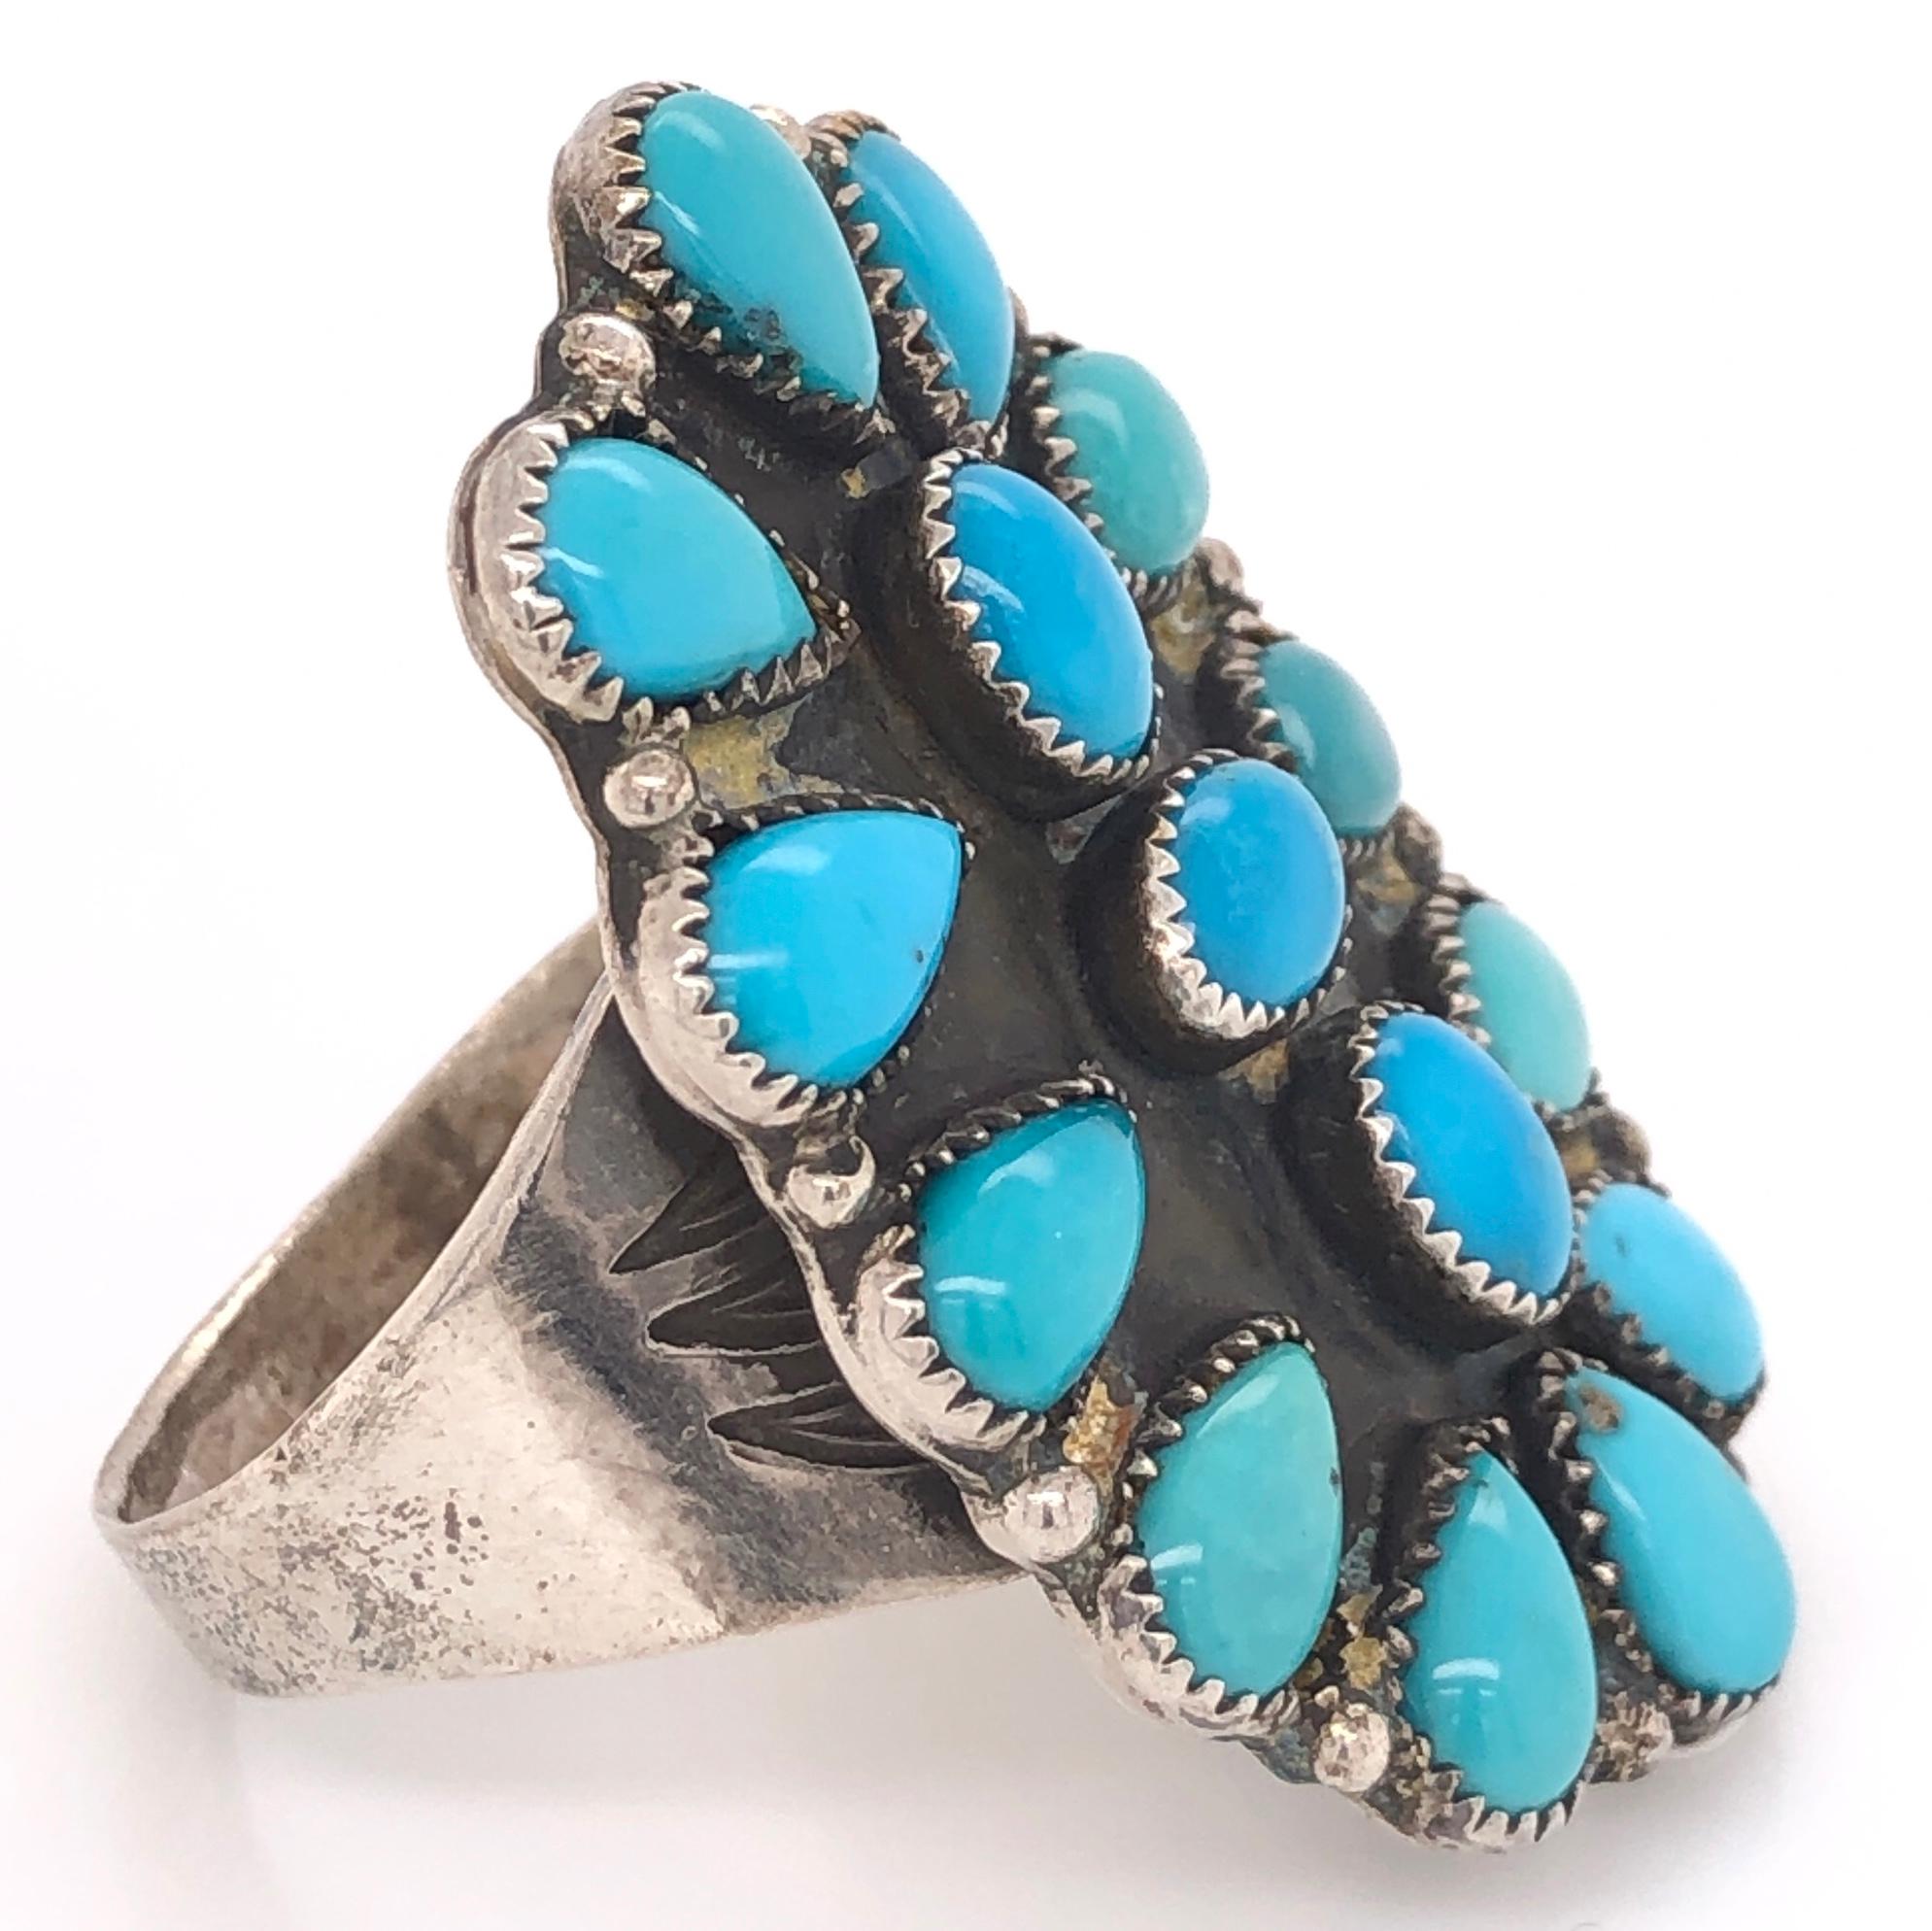 Stunning and highly desirable Native American Zuni Navajo 925 Sterling Silver large Men’s Petti Point Ring featuring multi Turquoise nuggets in beautifully crafted frame. Size 15, measuring approx.  1.75